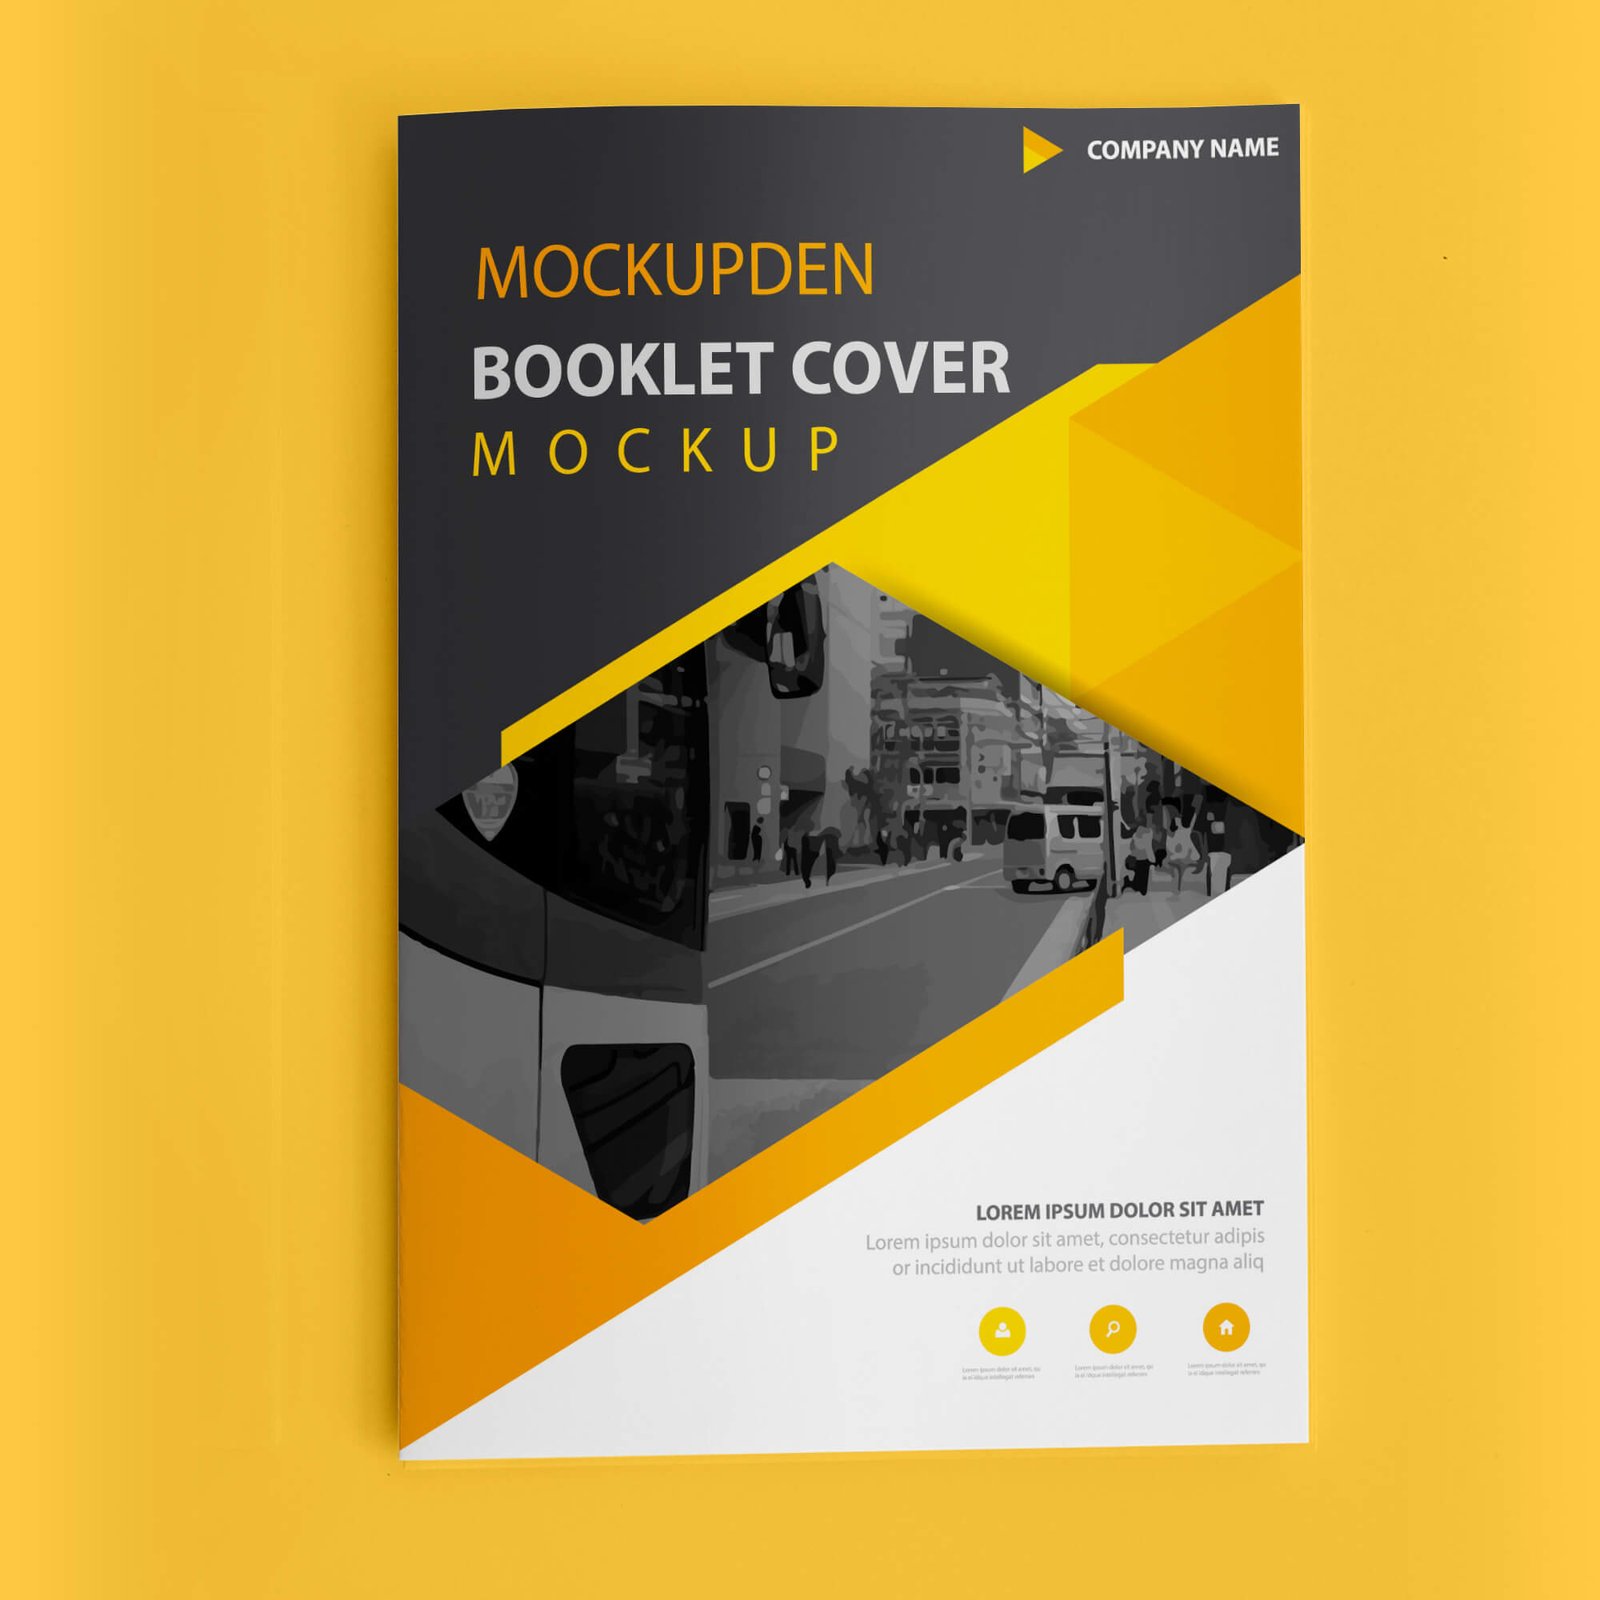 Design Free Booklet Cover Mockup PSD Template